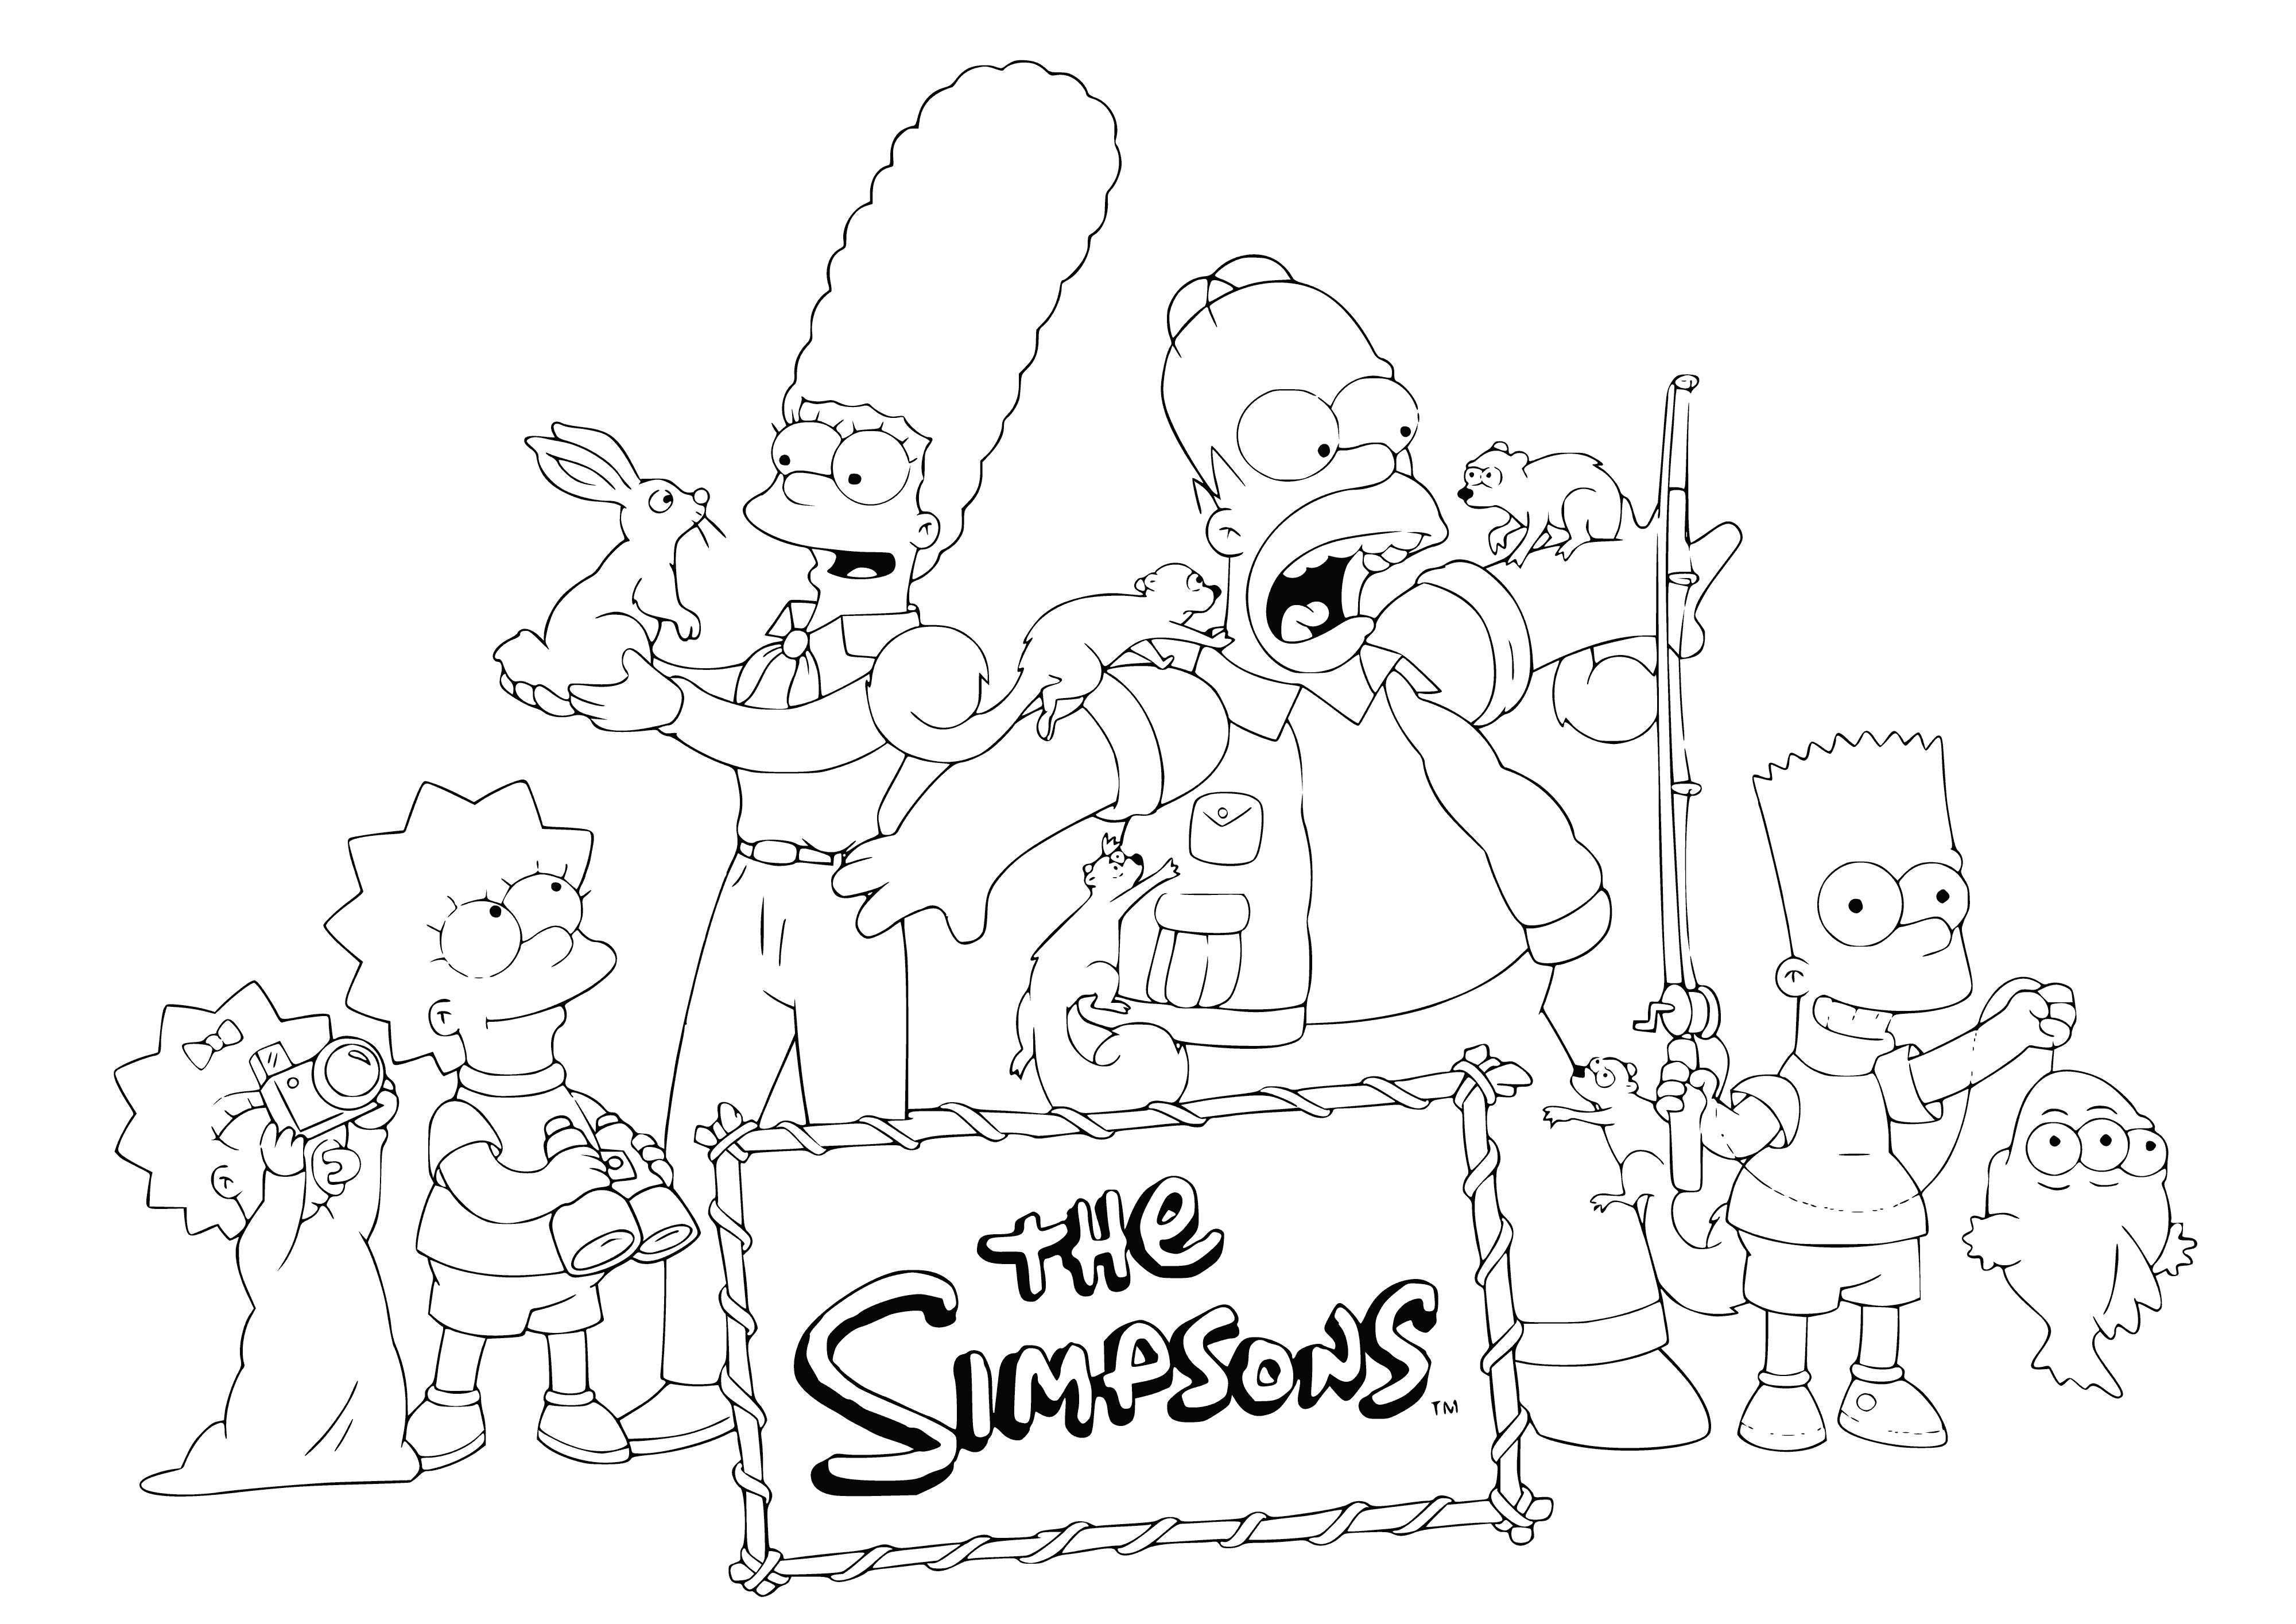 coloring page: A cartoon family of 5 hailing from Springfield get into hijinks & adventures. #TheSimpsons